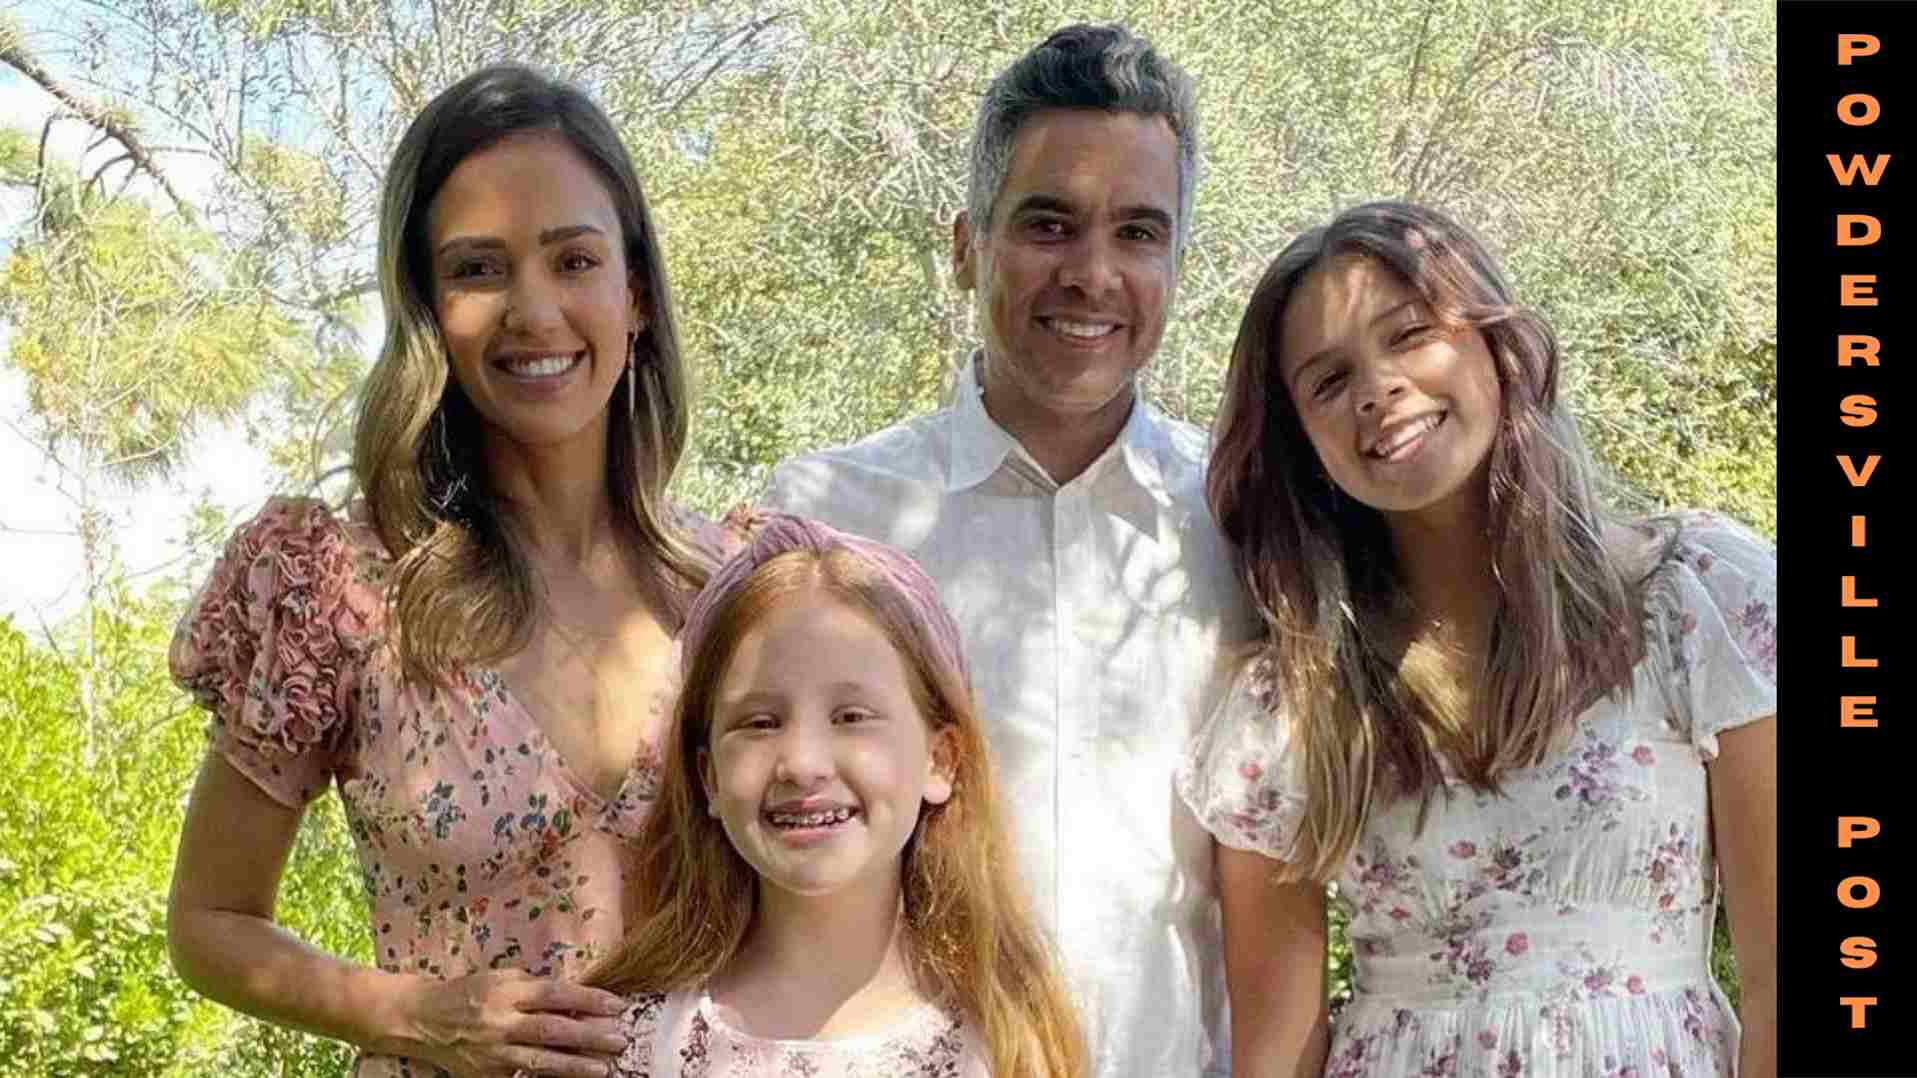 Former American Actress Jessica Alba's Lookalike Daughters Are All Grown Up In New Photo